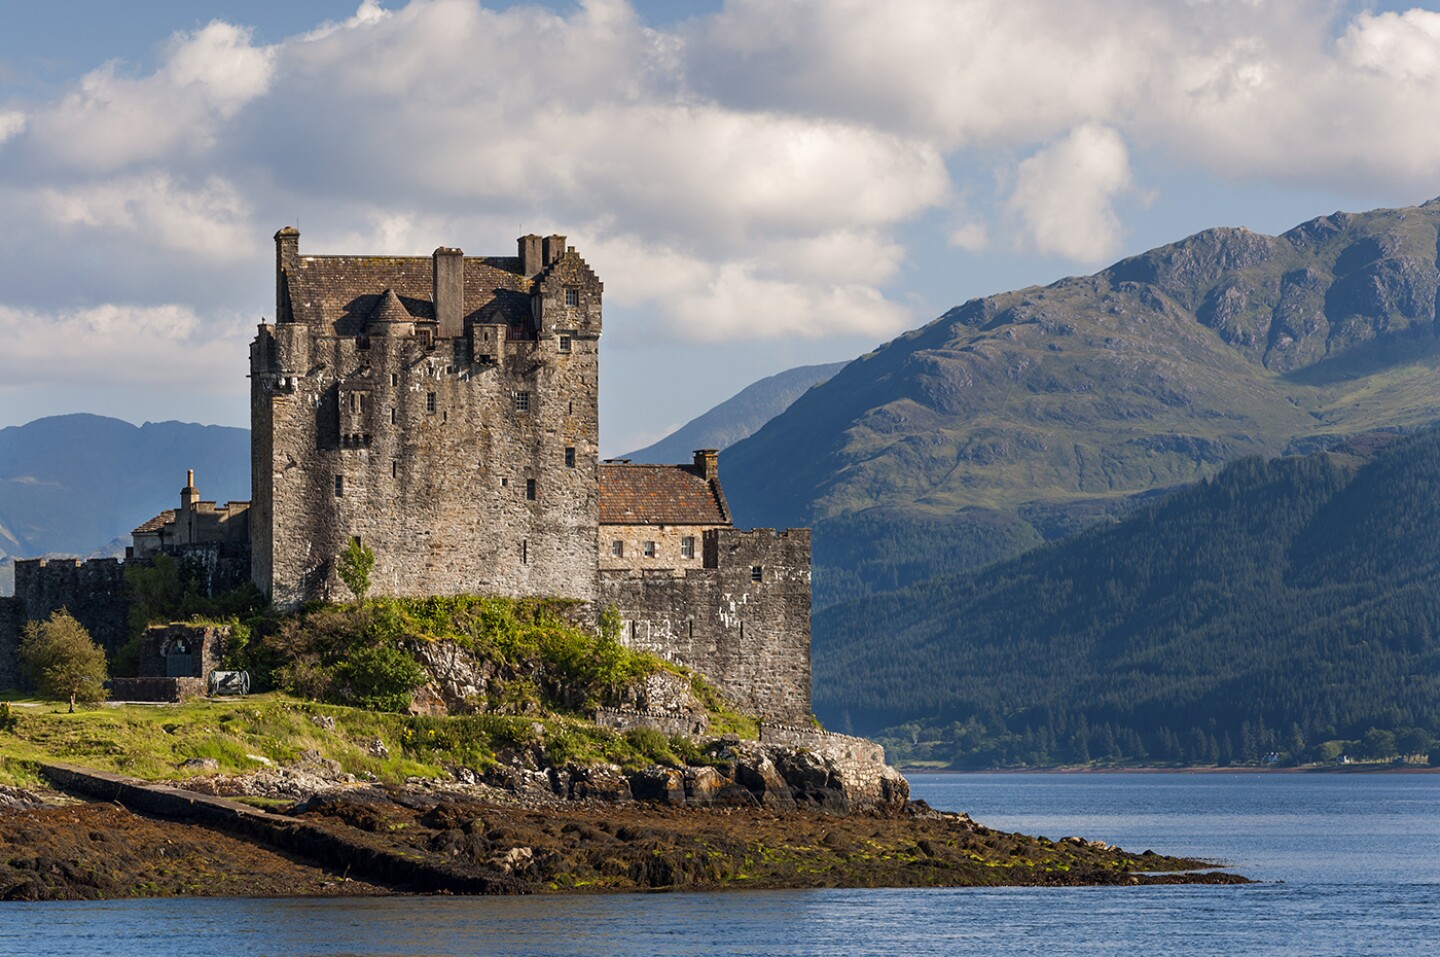 <h2>4. Eilean Donan Castle</h2> <p><i>Dornie, Scotland</i></p> <p> Fans of <i>Highlander</i> or James Bond’s <i>The World Is Not Enough</i> will likely recognize this picturesque <a class="Link" href="https://www.afar.com/travel-tips/the-essential-guide-to-the-highlands" rel="noopener">Scottish Highlands</a> castle, set on a small islet encircled by three sea lochs and accessible only by a stone footbridge. First built in the 13th century, <a class="Link" href="https://www.afar.com/places/eilean-donan-castle-dornie" rel="noopener">Eilean Donan Castle</a> served variously as a fortress, residence, and garrison during its long history before being almost entirely destroyed during the Jacobite rising of 1719. It lay in ruins for nearly 200 years until 1911, when a decades-long reconstruction began. Today, the castle, which you can visit with an audio guide, is largely a re-creation of what it looked like in the 18th century, complete with rich Jacobite-era decor, weapons, and artifacts.<br> </p> <h3>How to visit Eilean Donan Castle</h3> <p>Note that <a class="Link" href="https://www.eileandonancastle.com/" rel="noopener">Eilean Donan</a> is closed in January. From Inverness, about two hours away, day tours and public buses offer direct access to the castle. </p>